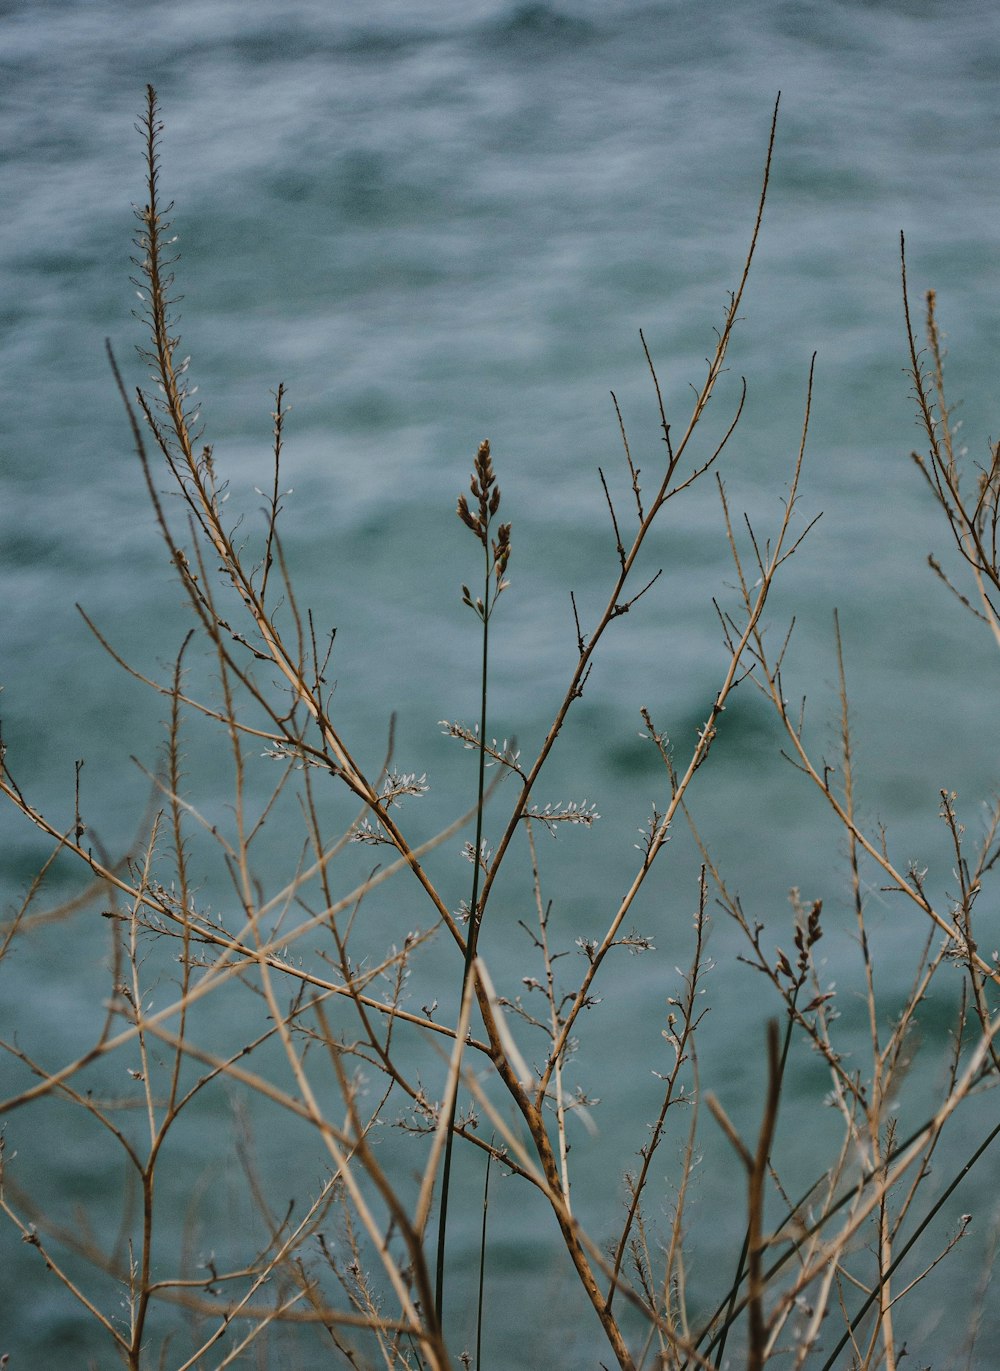 a bird is perched on a branch by the water